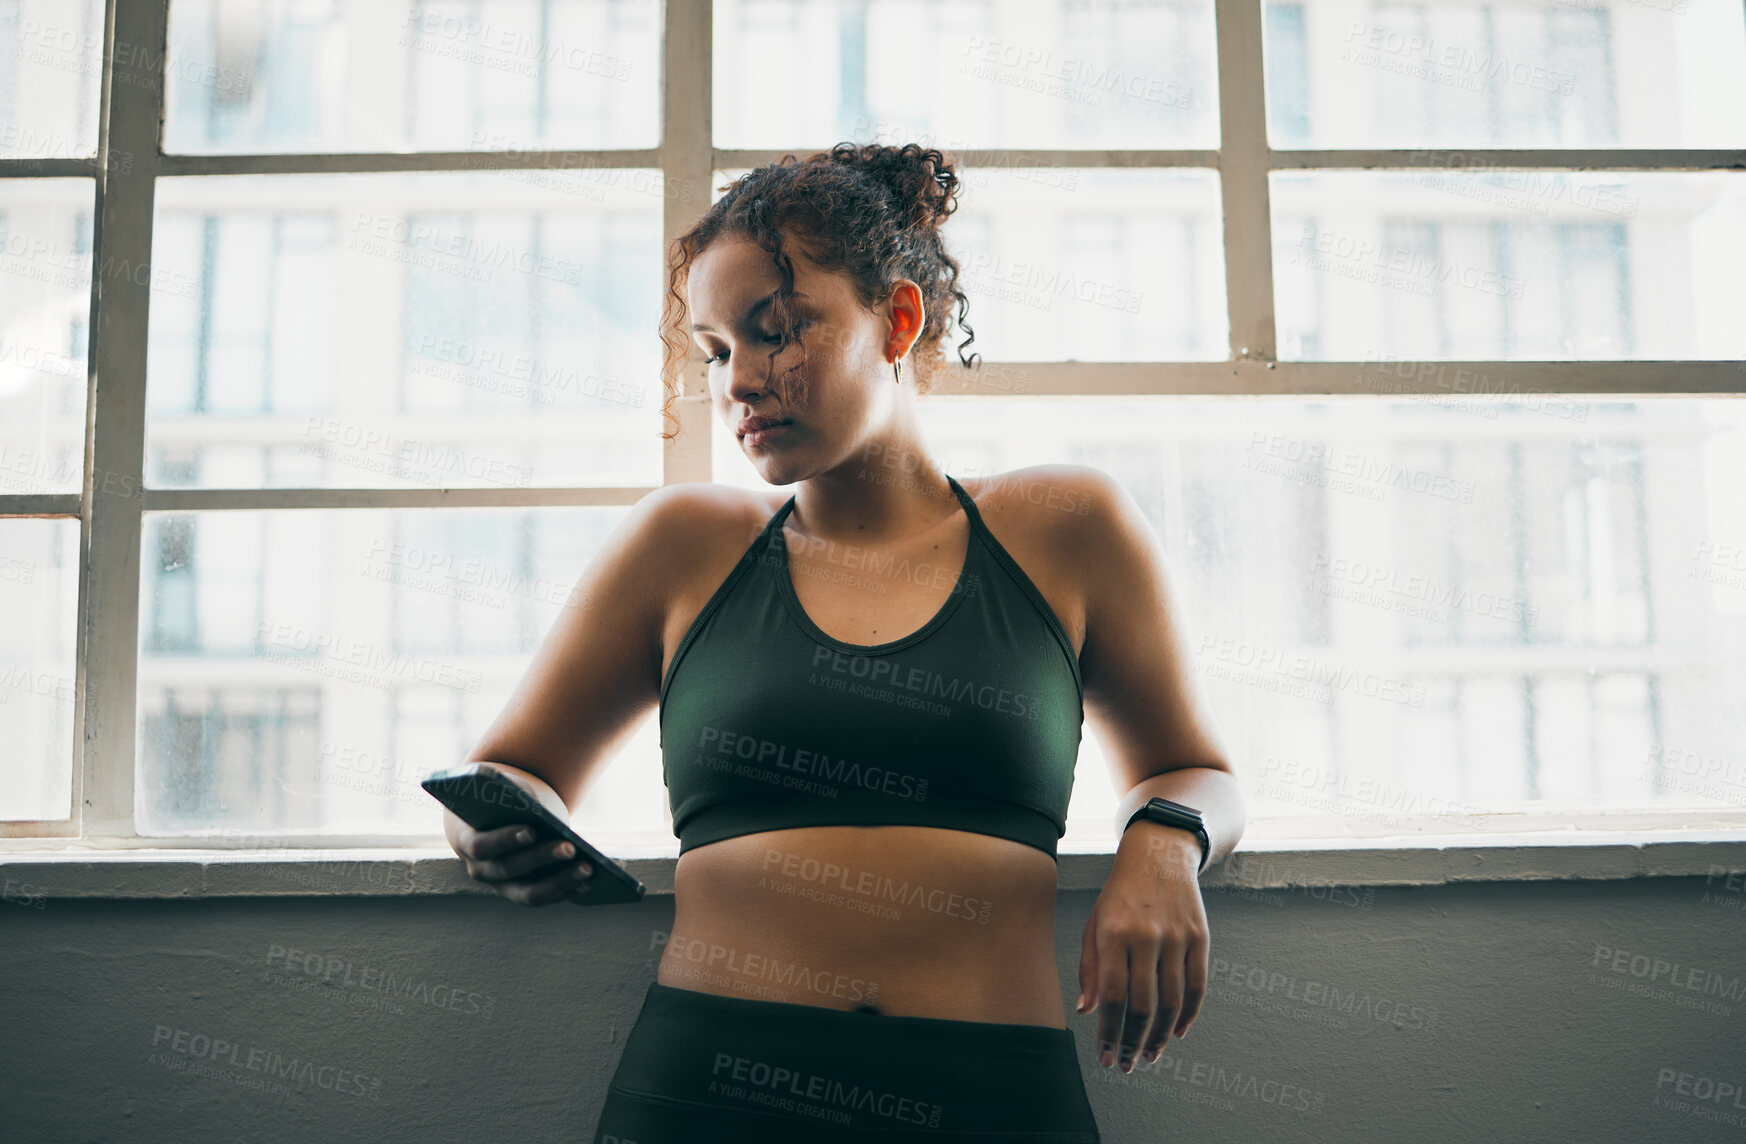 Buy stock photo Idea, phone and exercise with a sports woman by a window, standing in the gym during a fitnesss workout. Health, thinking and a female athlete using social media or an app to track her training